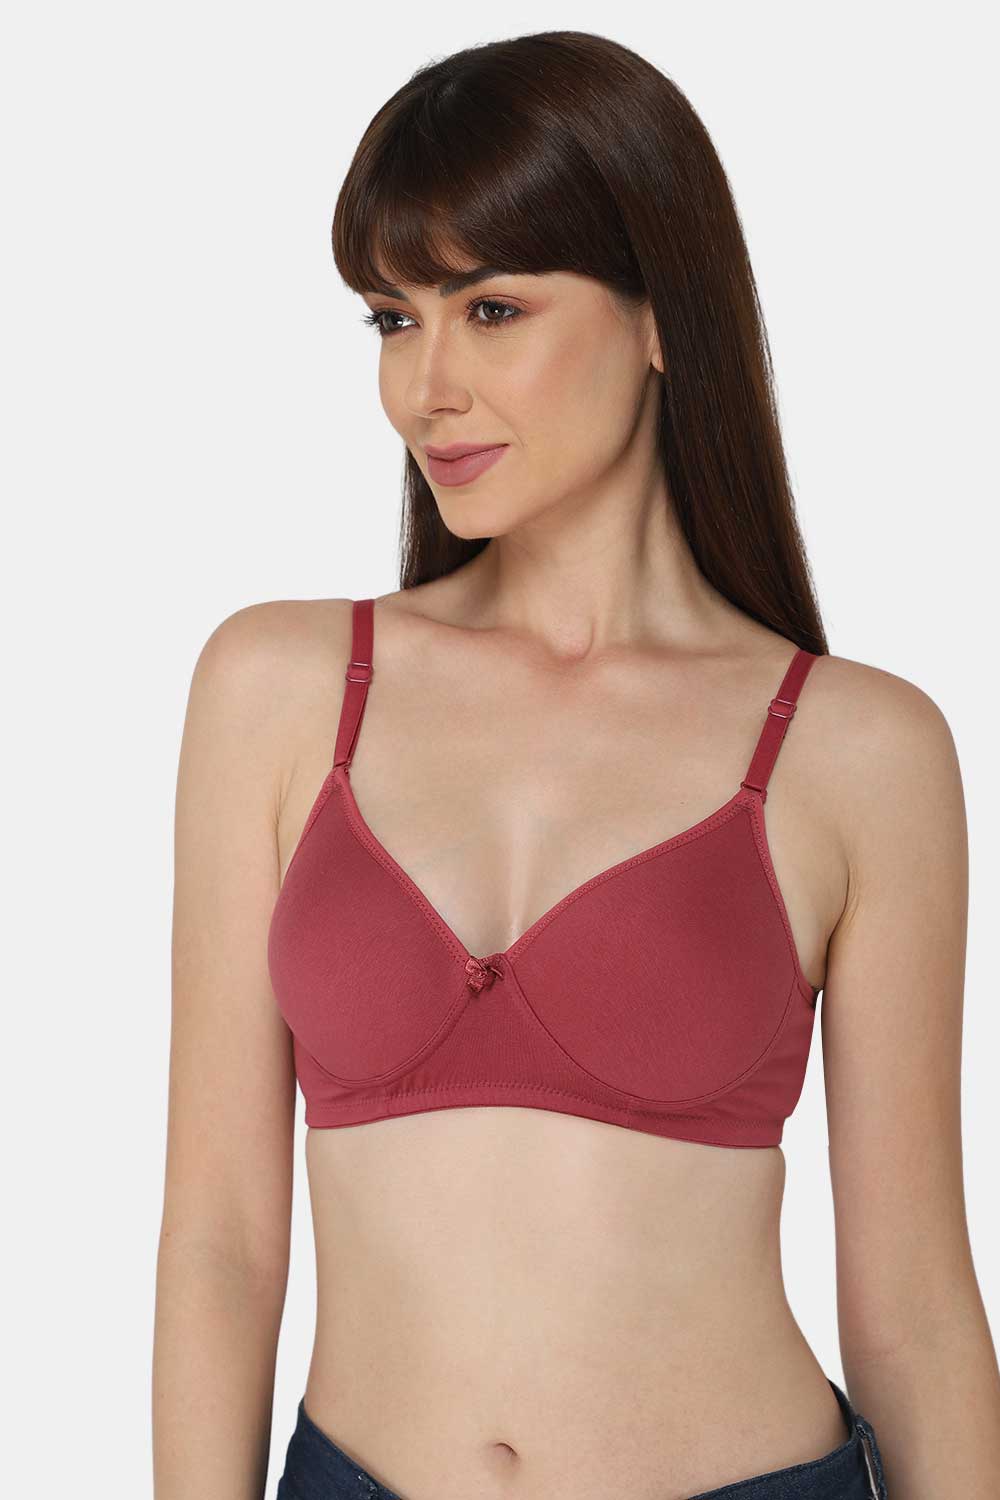 Intimacy Non-Wired Thin & Adjustable T-Shirt Padded Bra- Claretred